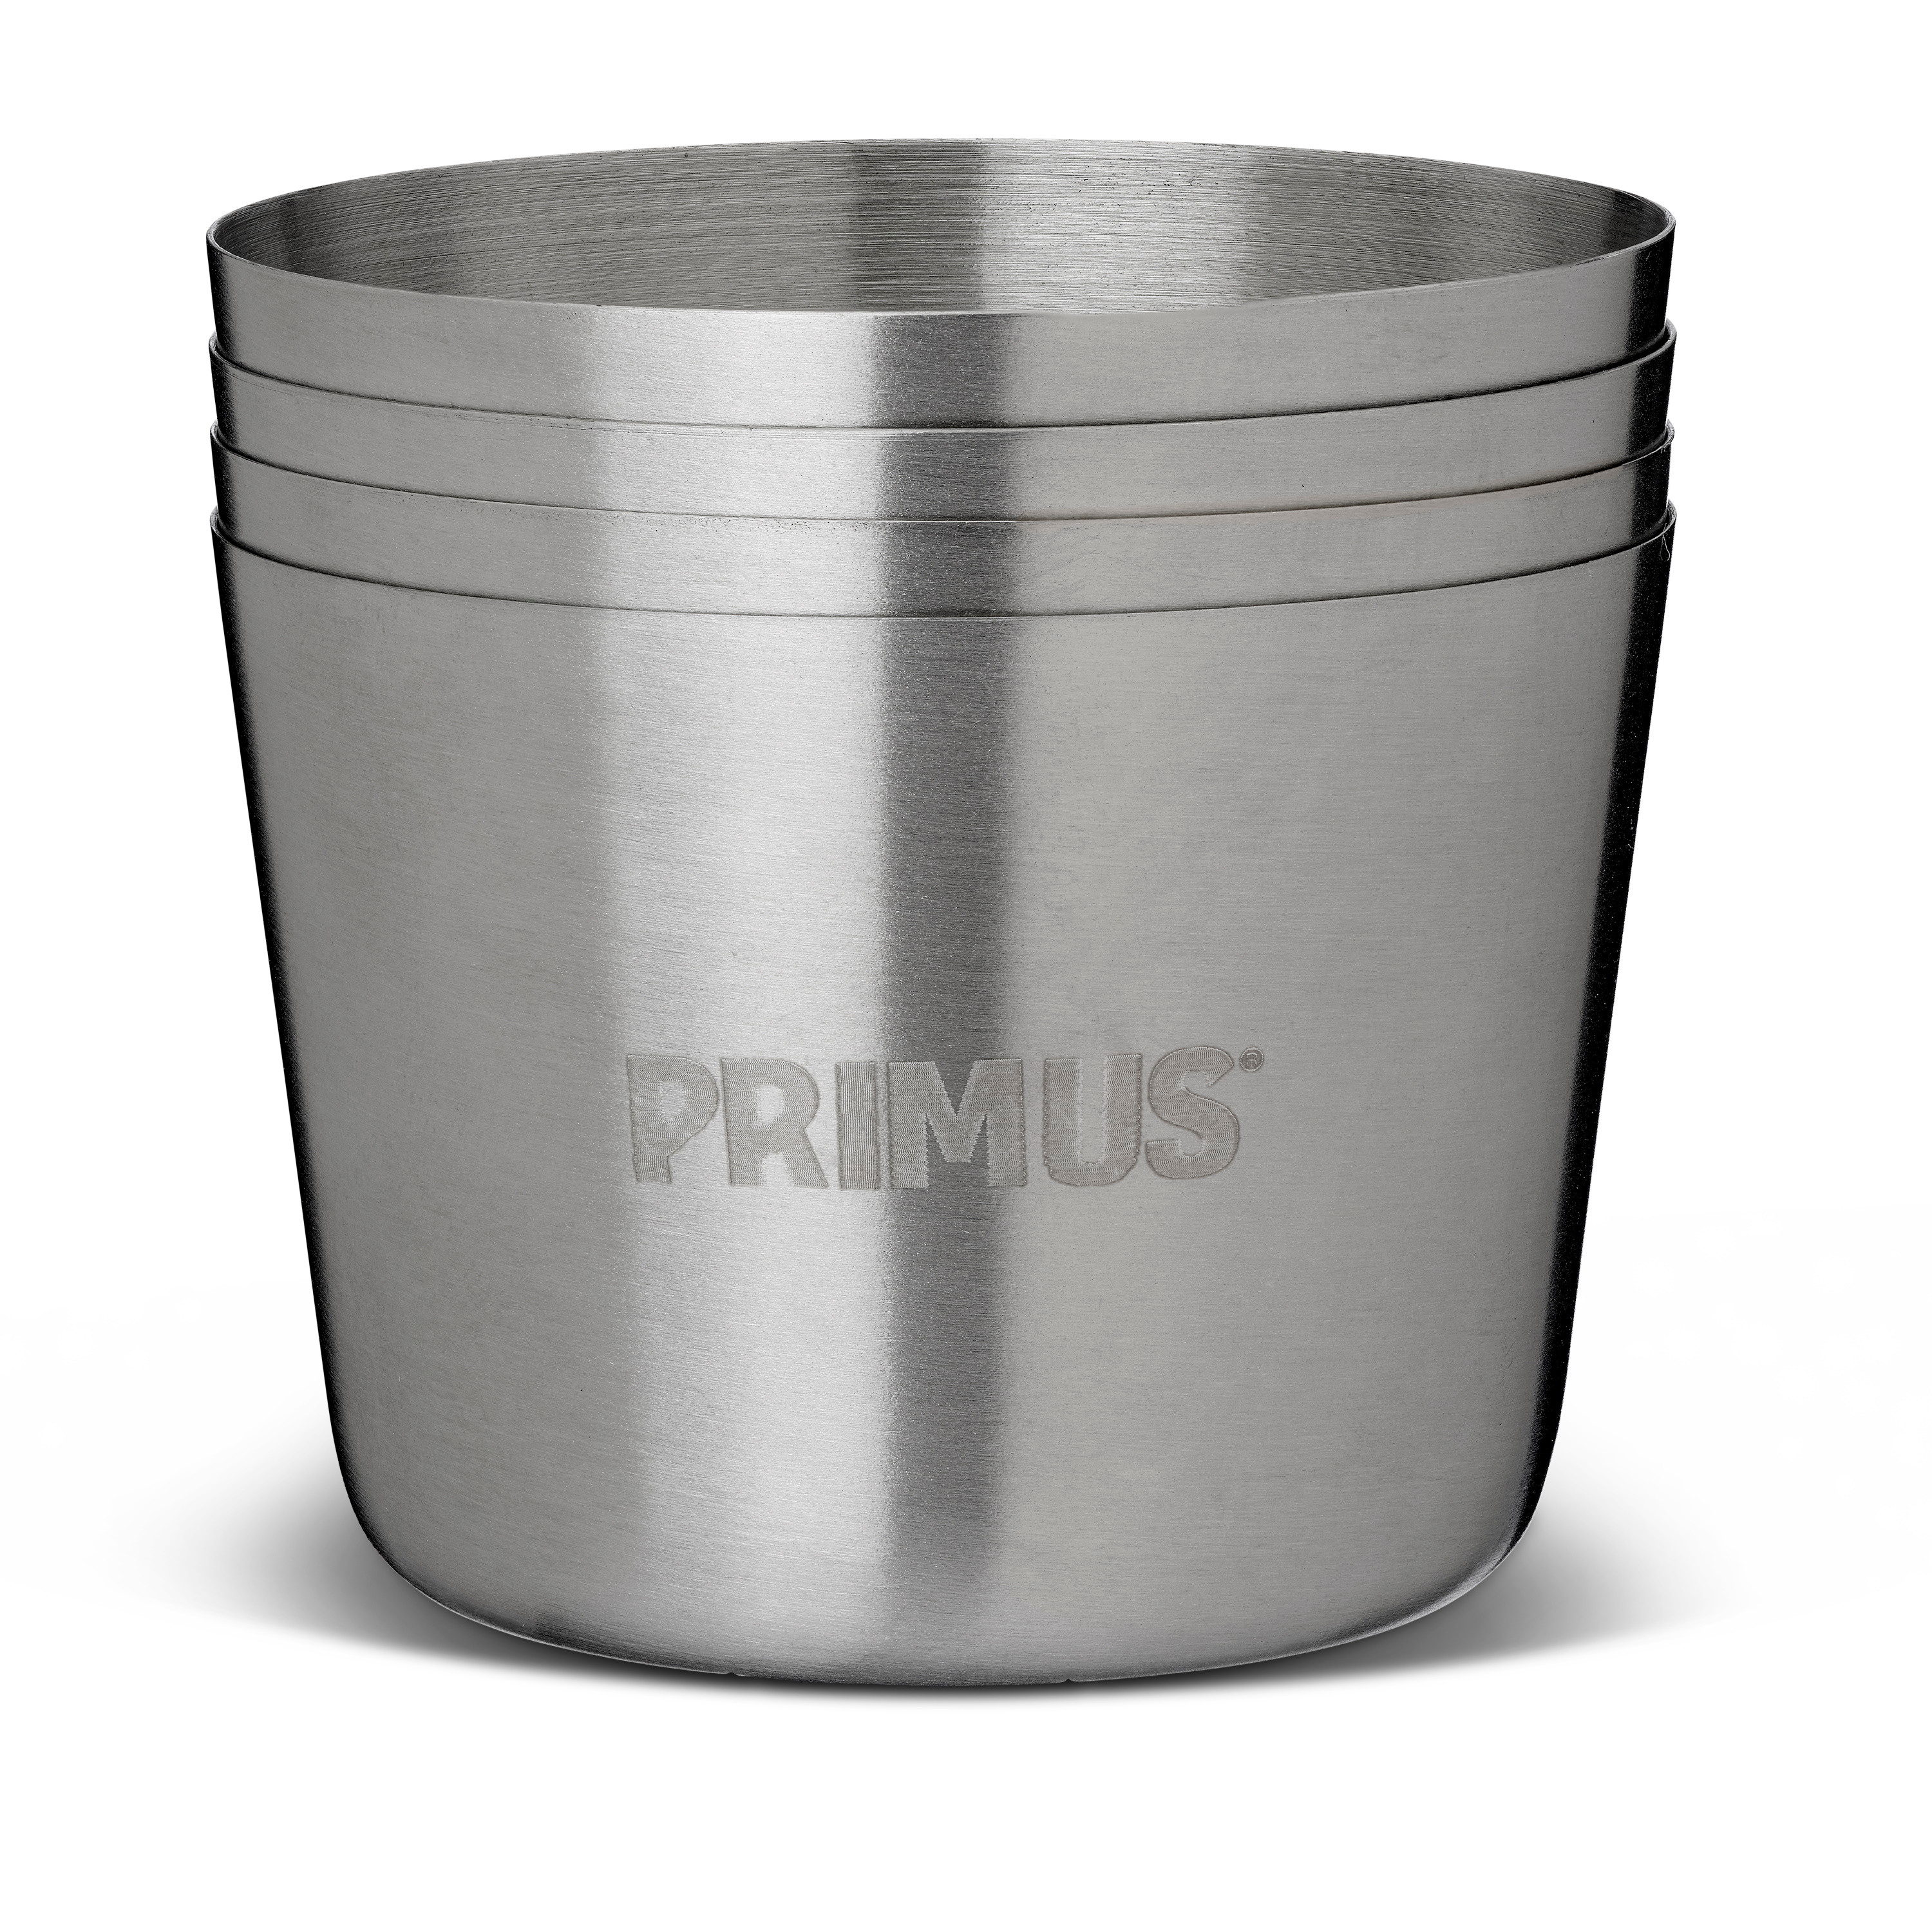 Primus Shot Glass S/S 4 Pack